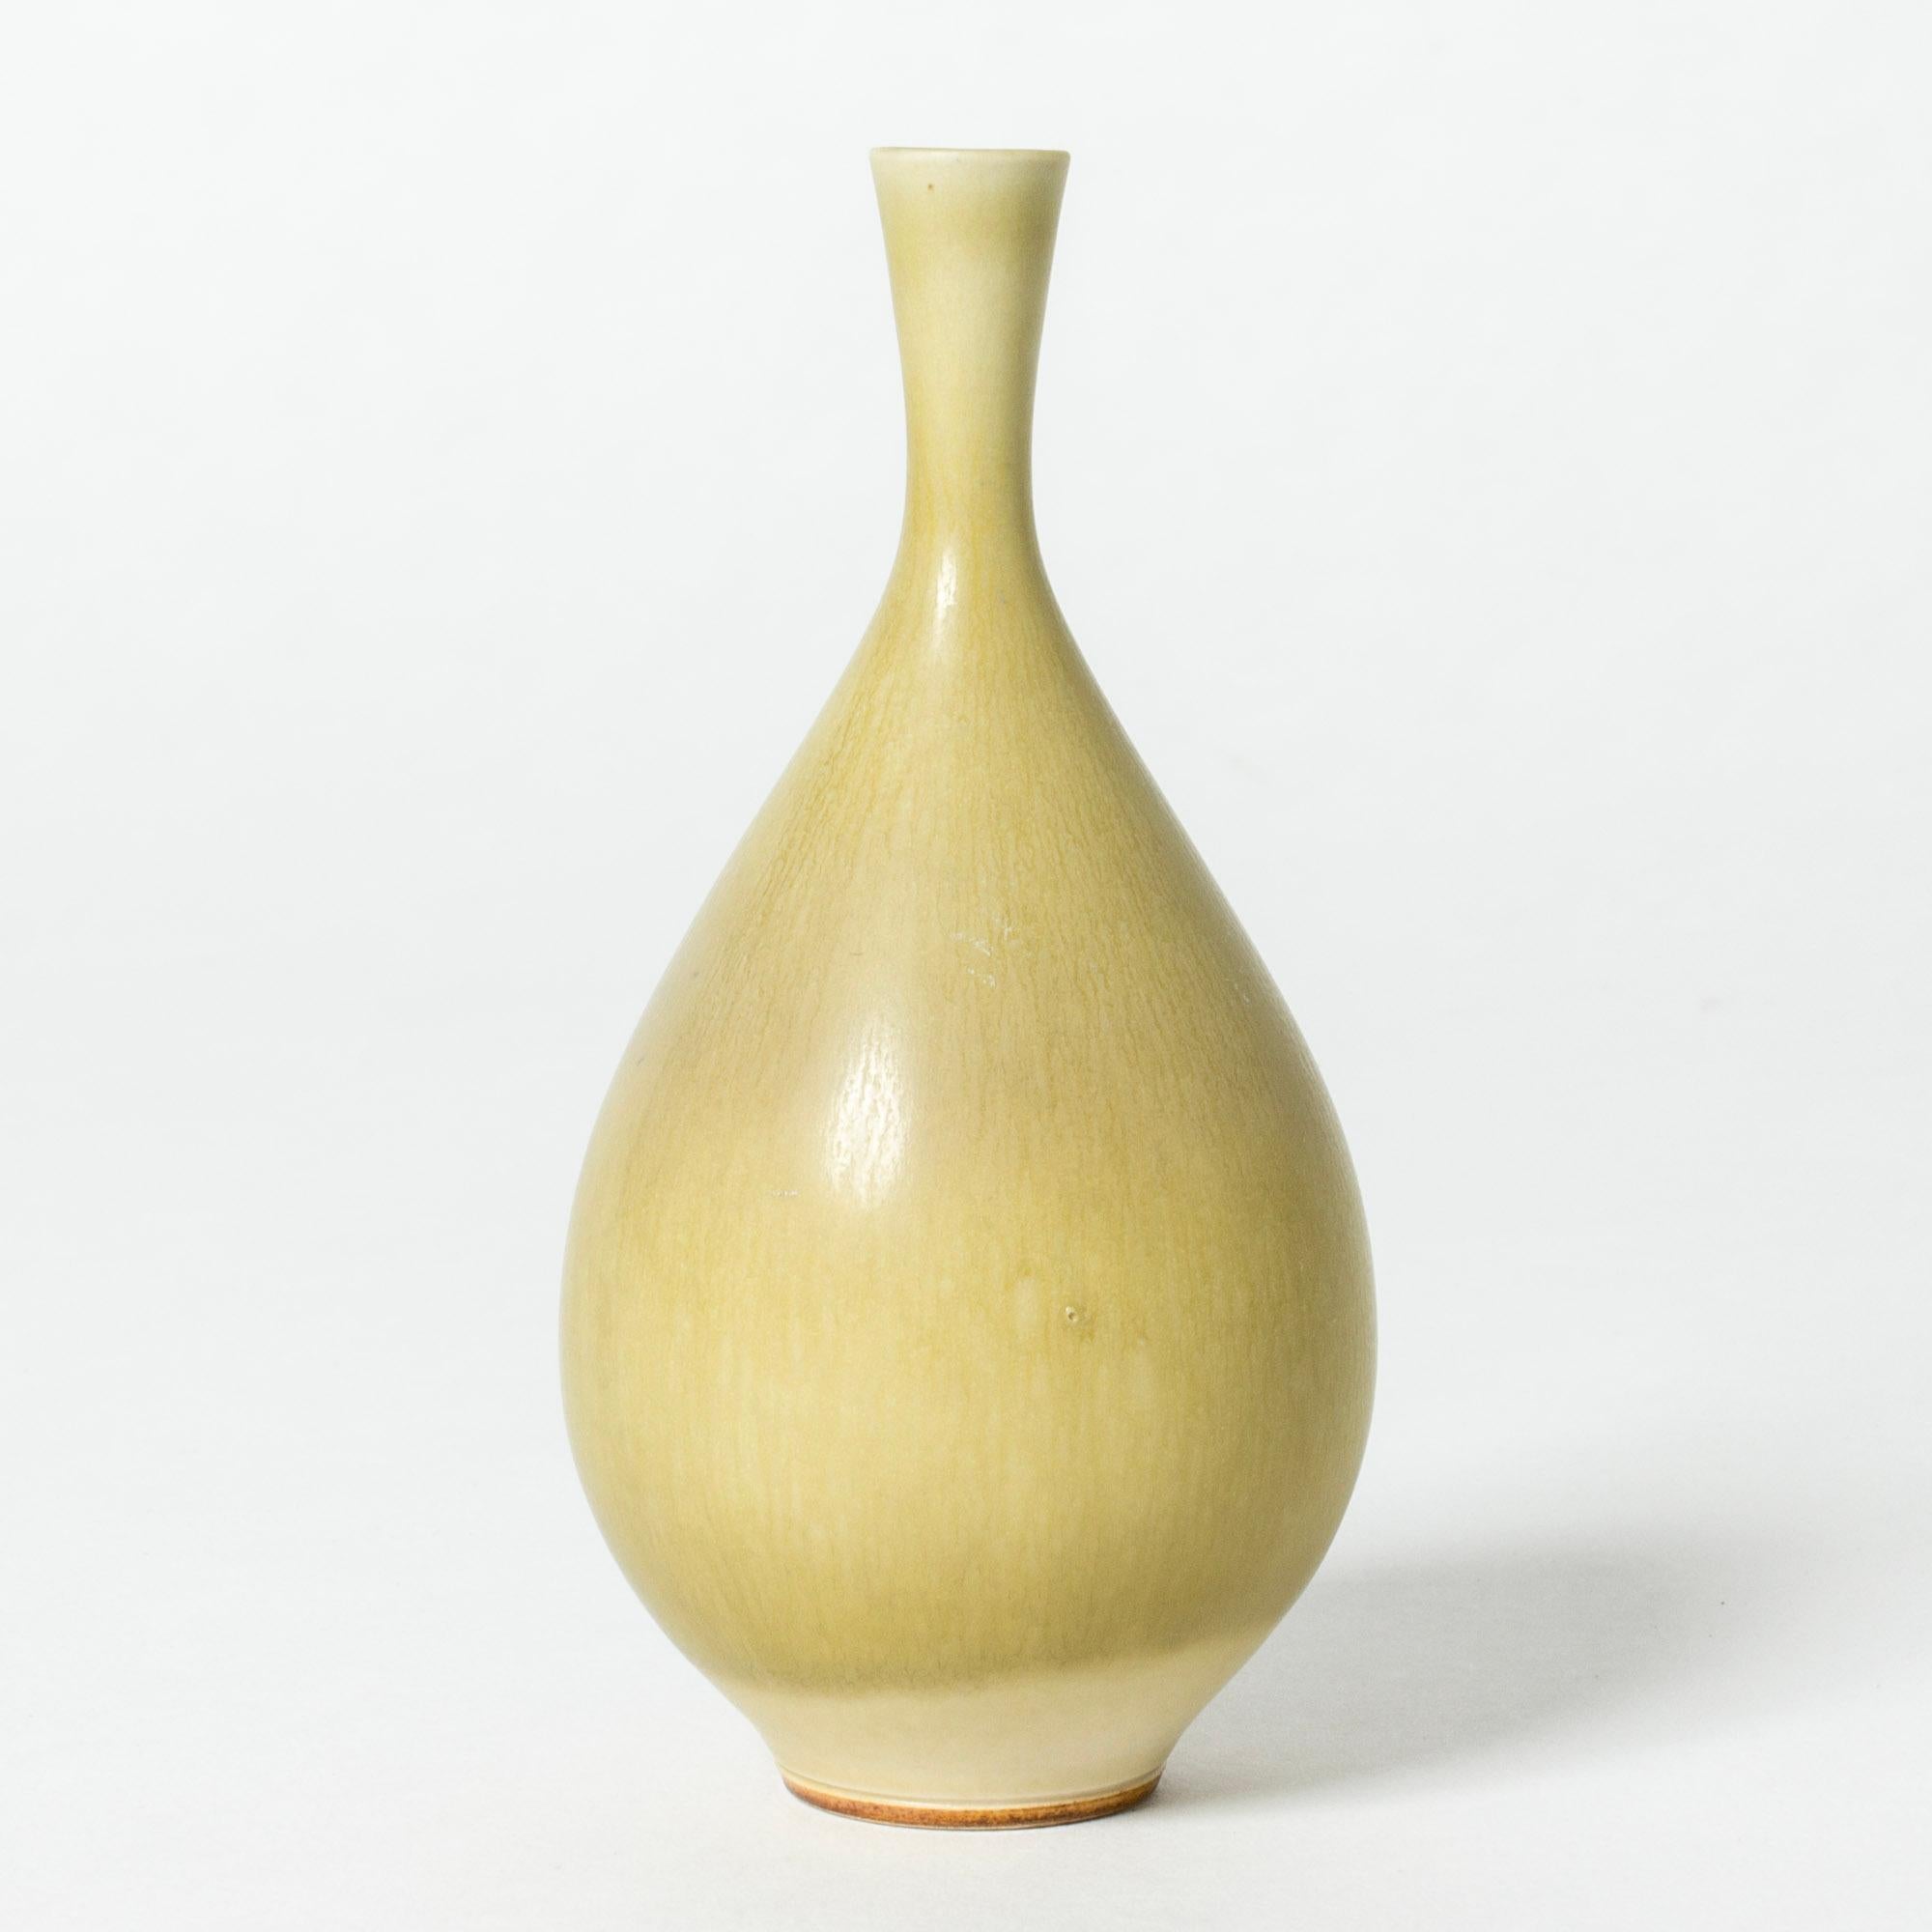 Lovely stoneware vase by Berndt Friberg in a smooth, bulbous form. Pale yellow hare’s fur glaze.

Berndt Friberg was a Swedish ceramicist, renowned for his stoneware vases and vessels for Gustavsberg. His pure, composed designs with satiny,